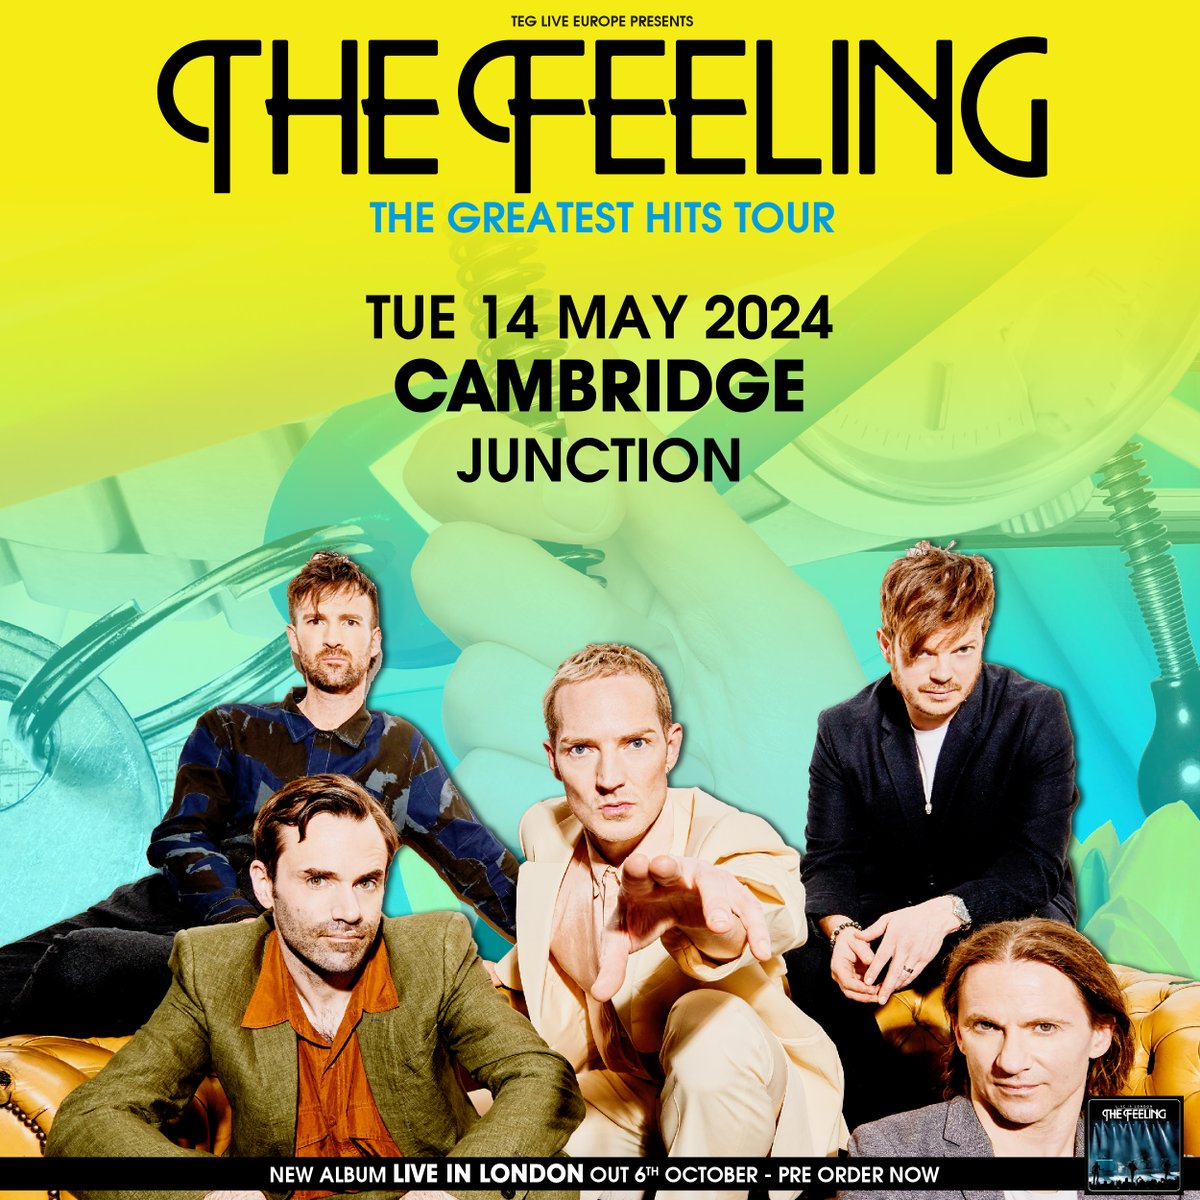 TONIGHT • The Feeling Running Times: 7pm doors 7.15pm Cam T 8pm Callum Beattie 9pm The Feeling 11pm curfew (times are subject to change)